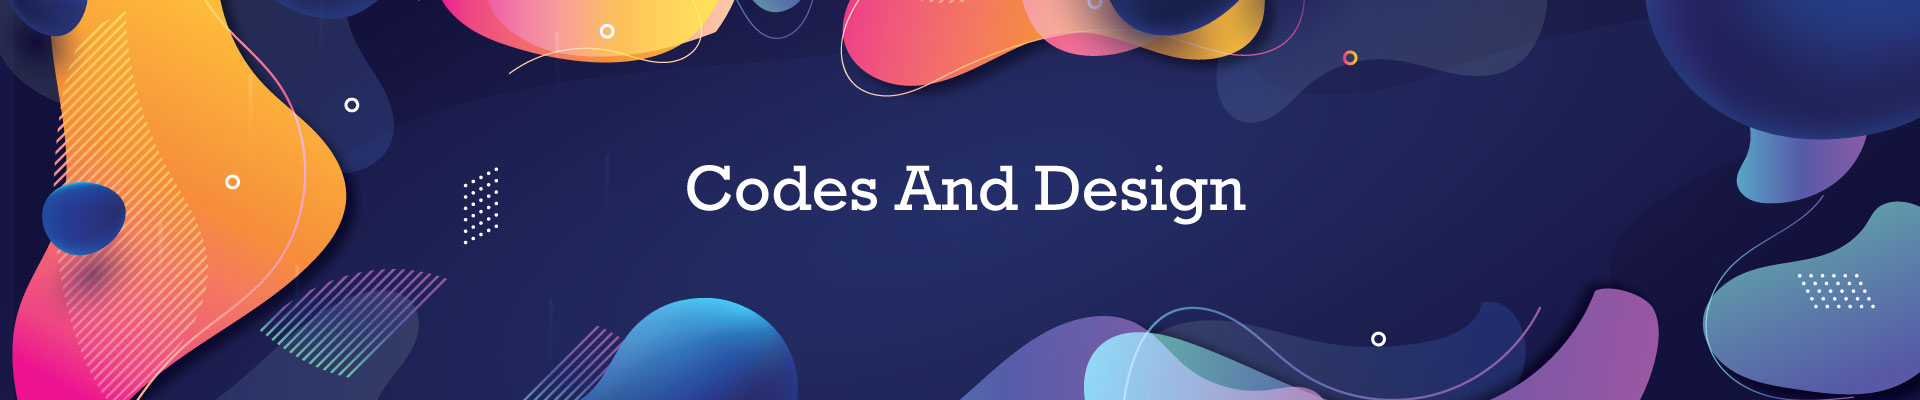 Codes And Design